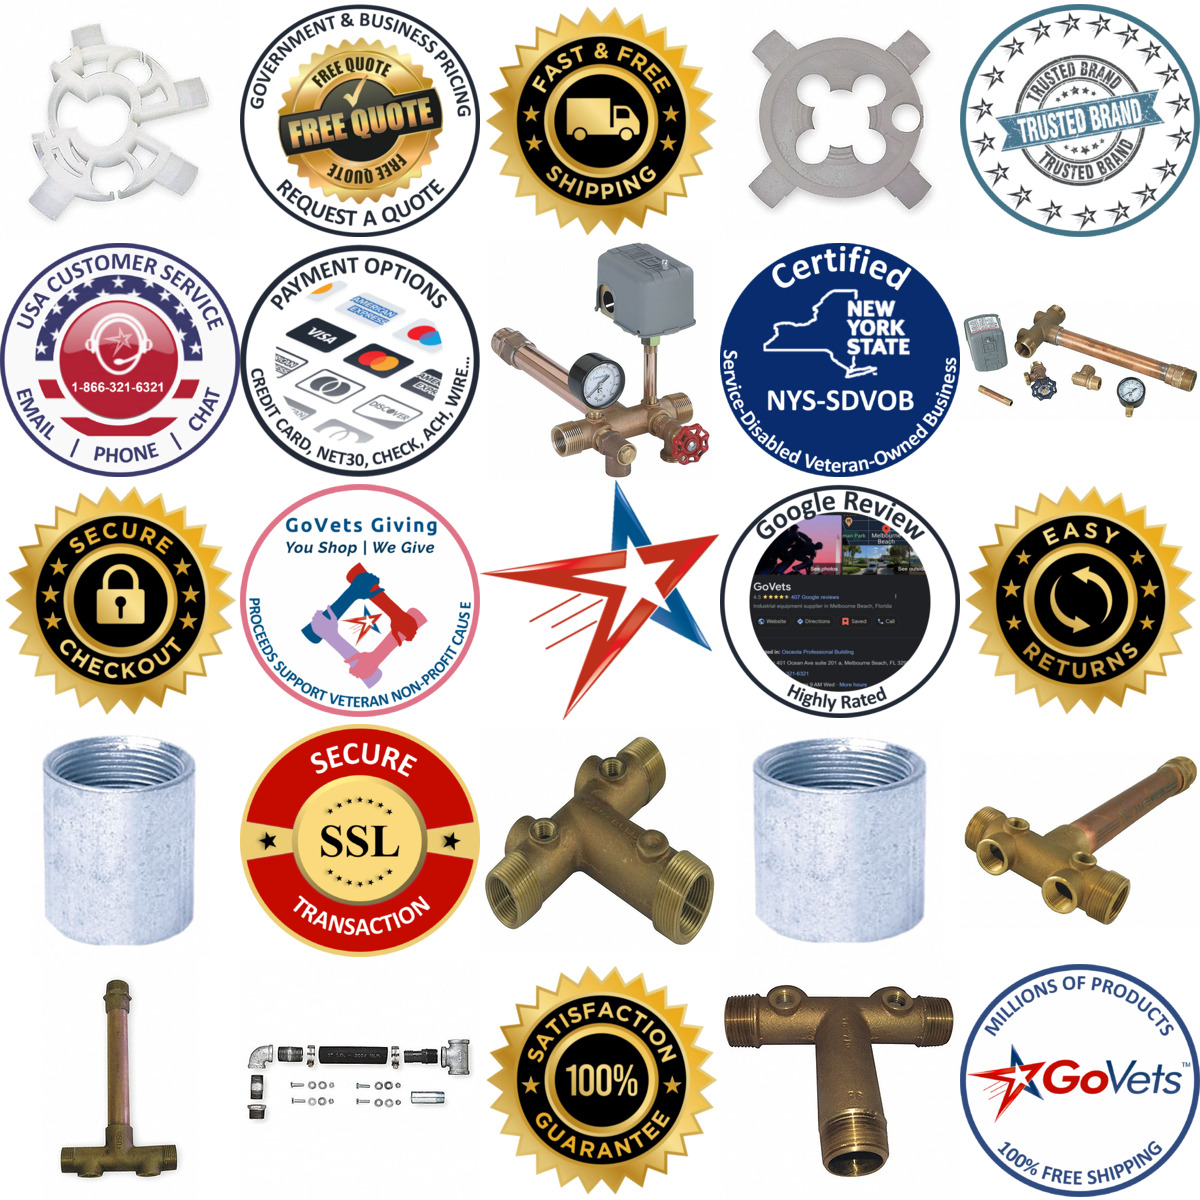 A selection of Well Water Tank Fittings products on GoVets